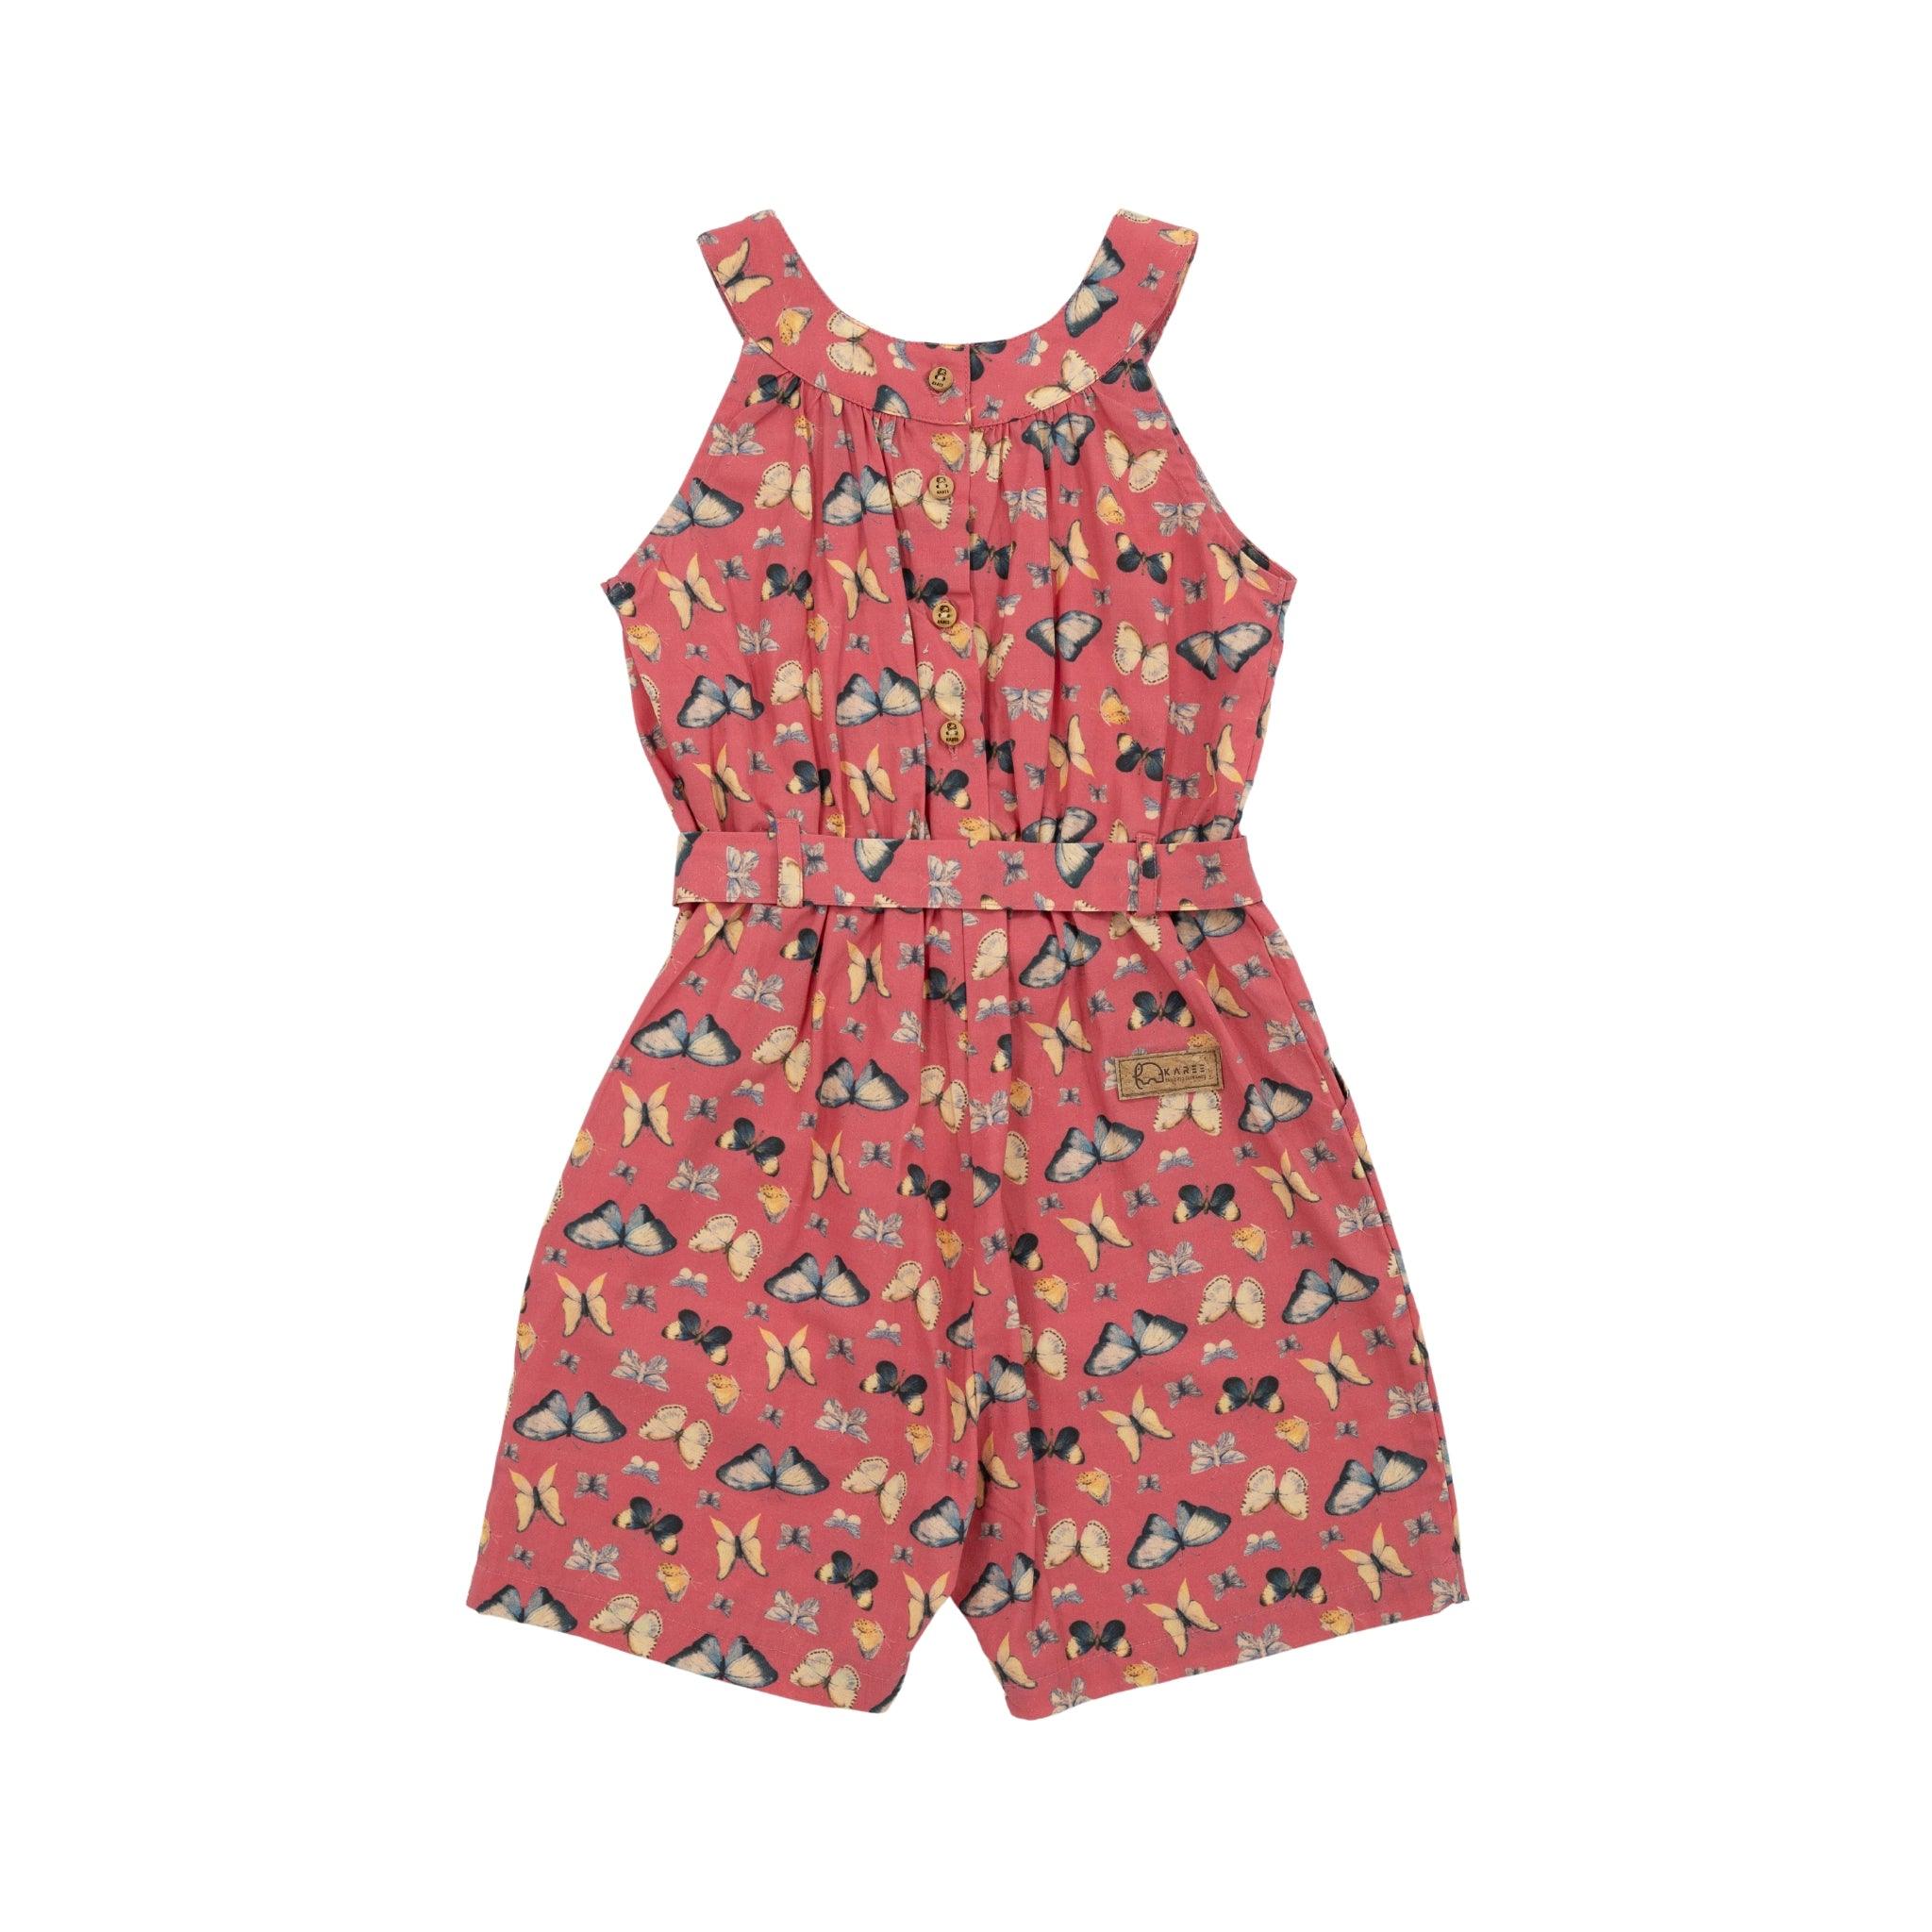 A sleeveless Blue Surf Adventure-ready Cotton Play Suit romper with a floral and bird print, cinched at the waist, crafted from a premium cotton blend, displayed against a white background by Karee.